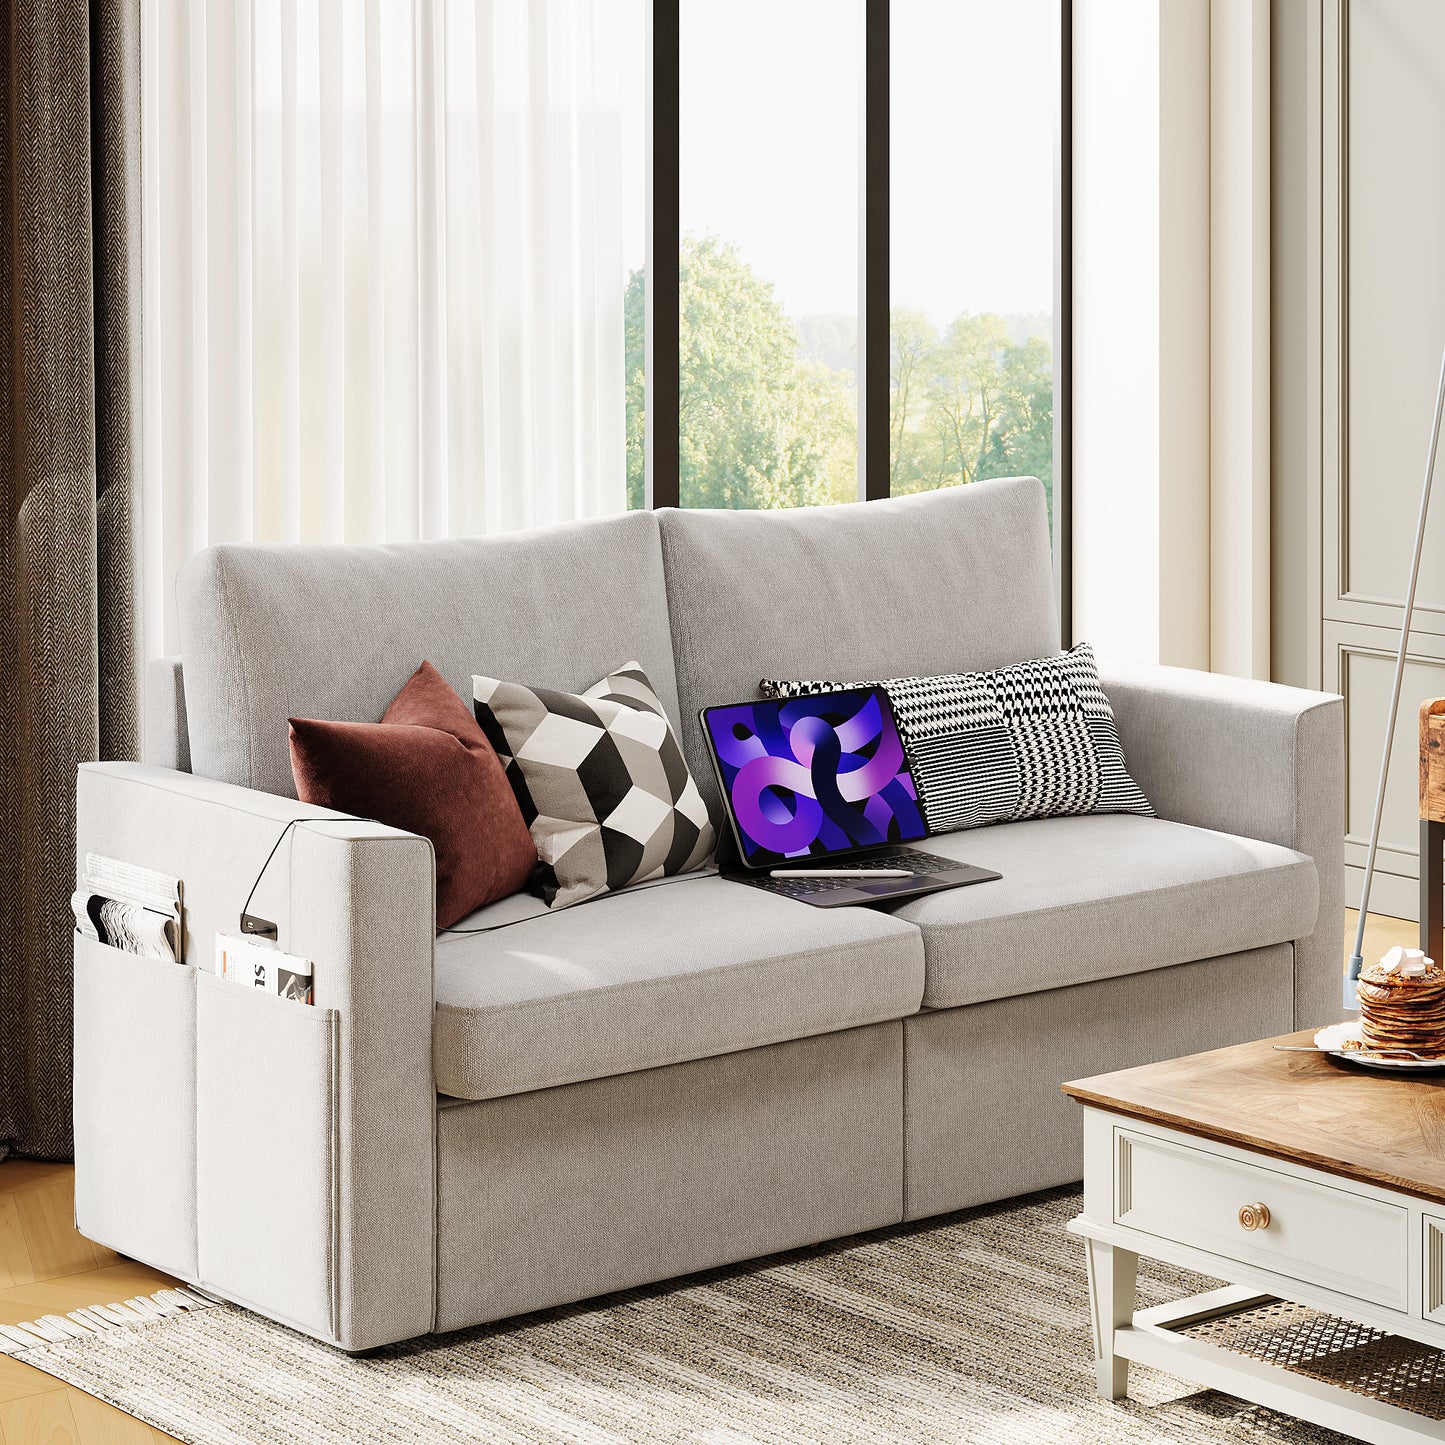 LIKIMIO Loveseat Sofa with Drawer & Charging Port